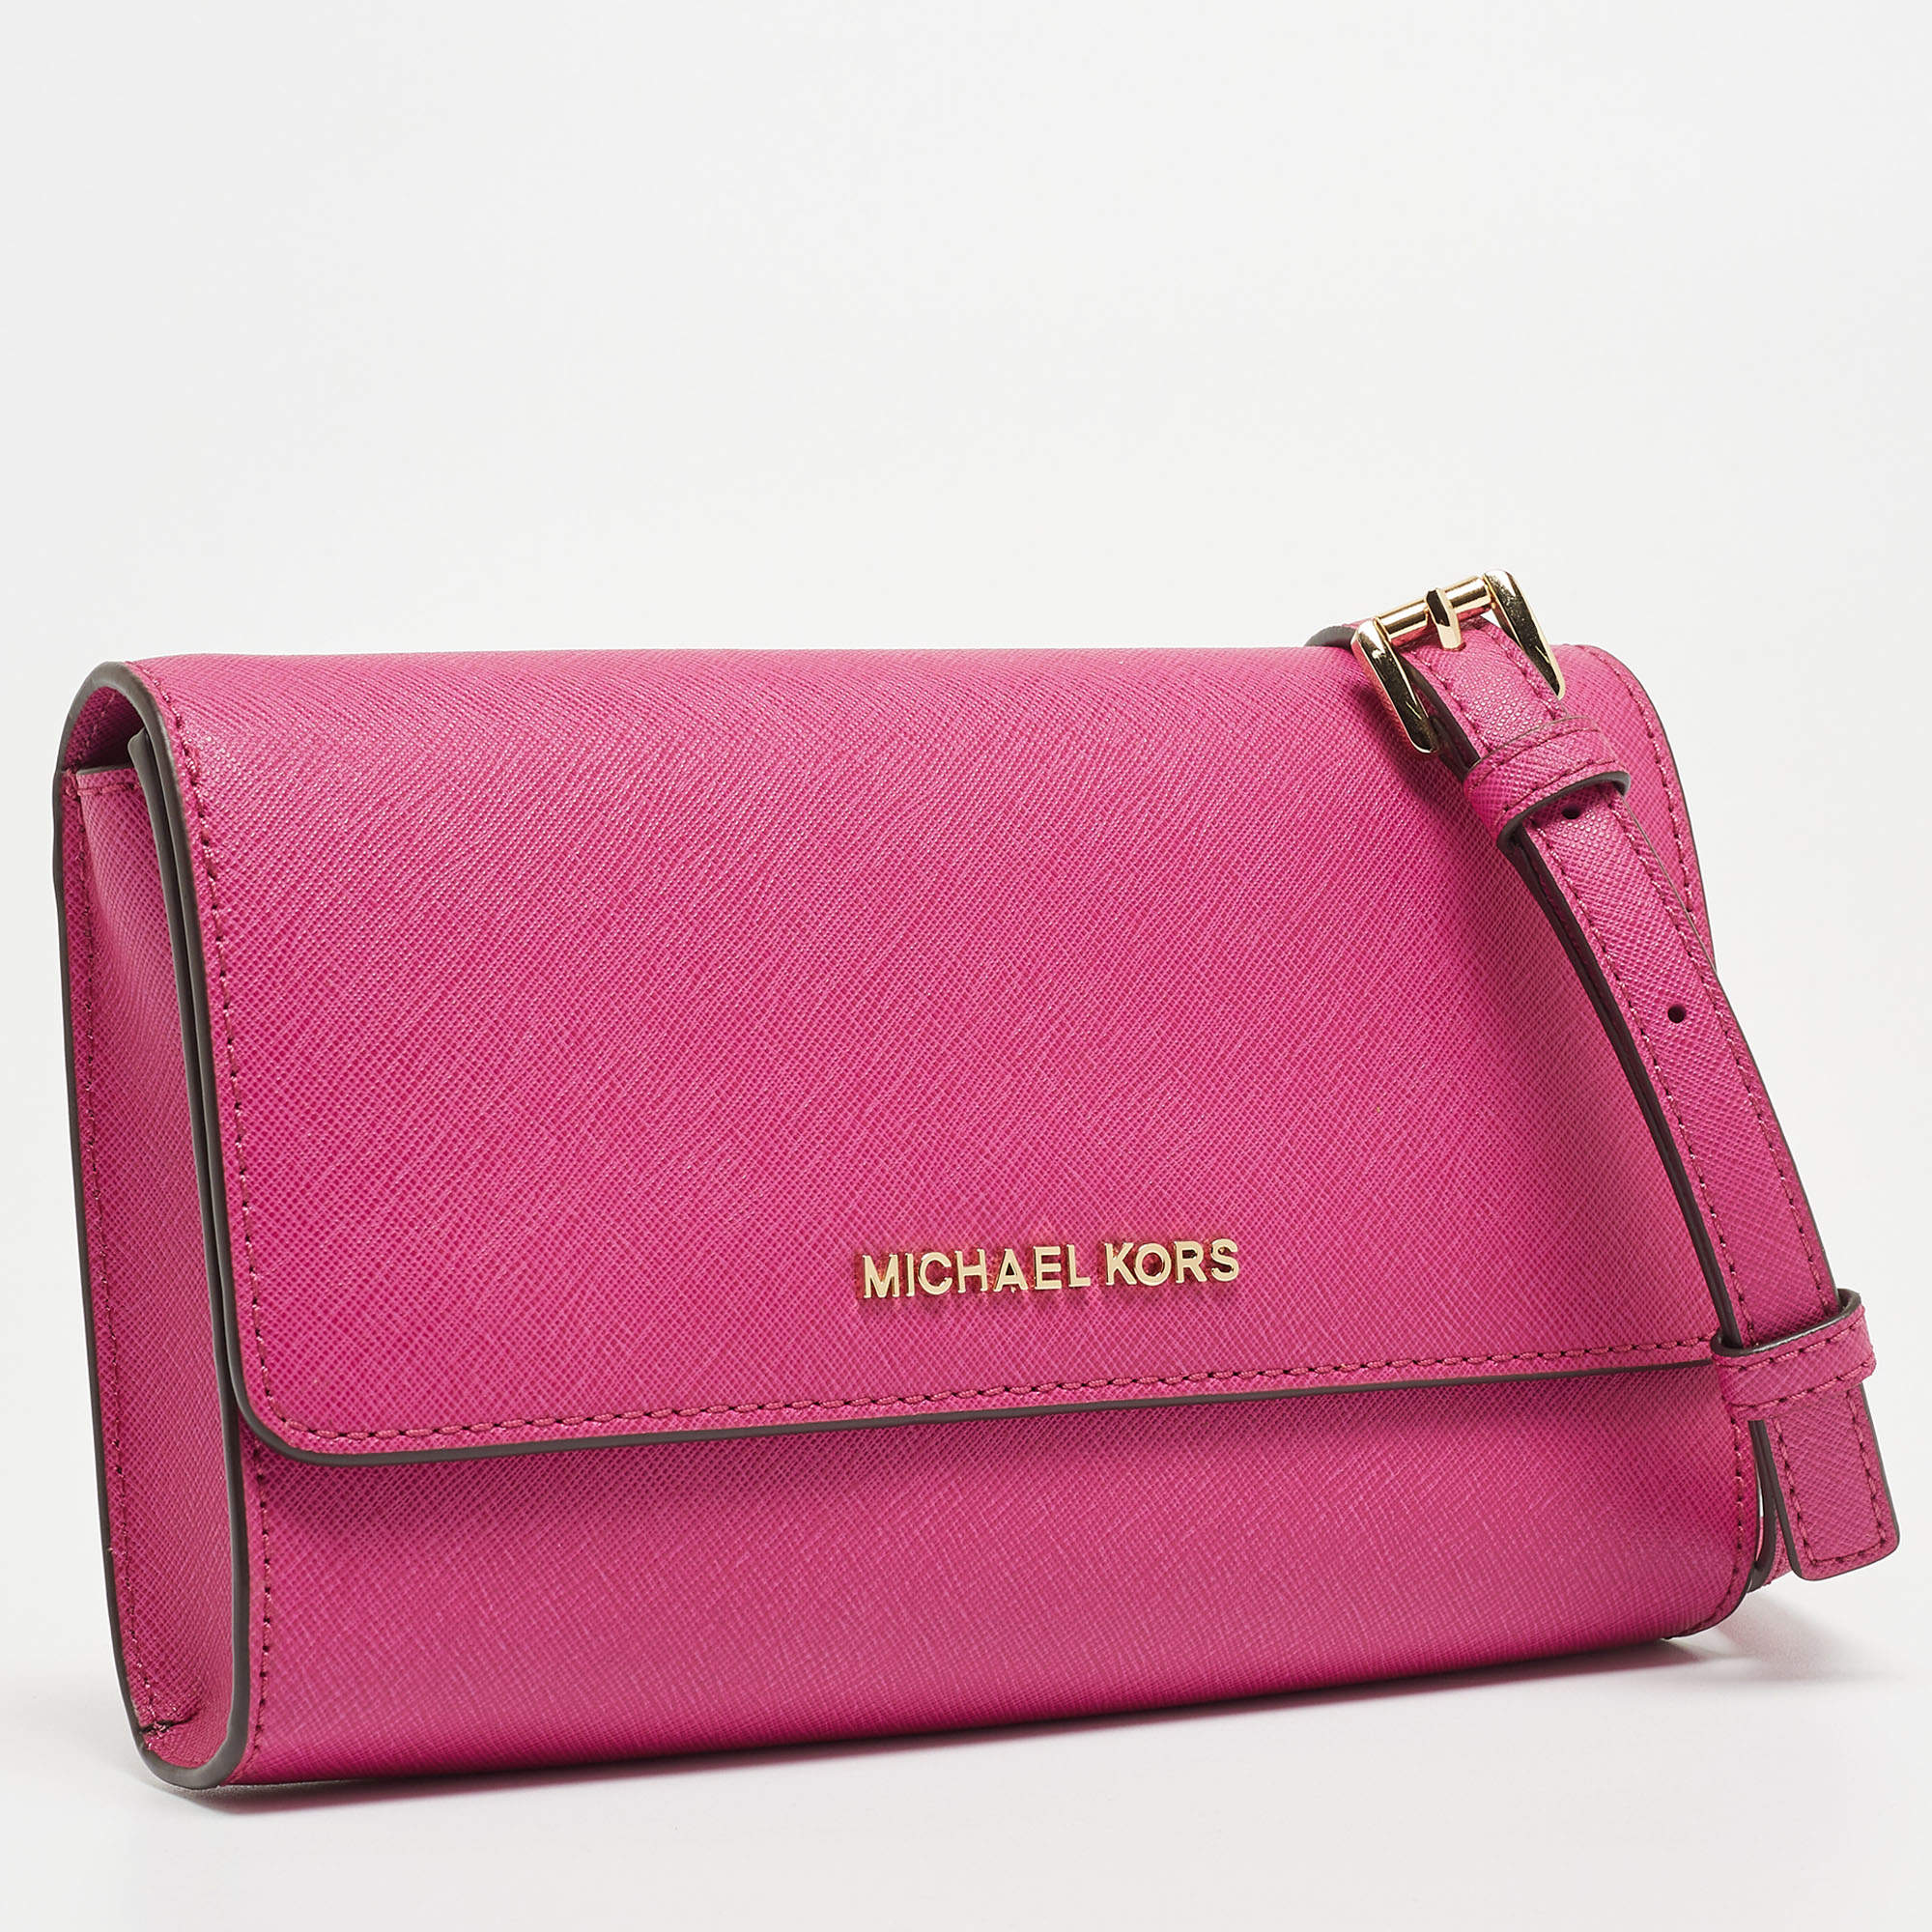 MICHAEL KORS Saffiano Leather 3-in-1 Crossbody Bag NEW WITH TAGS! Big Sale